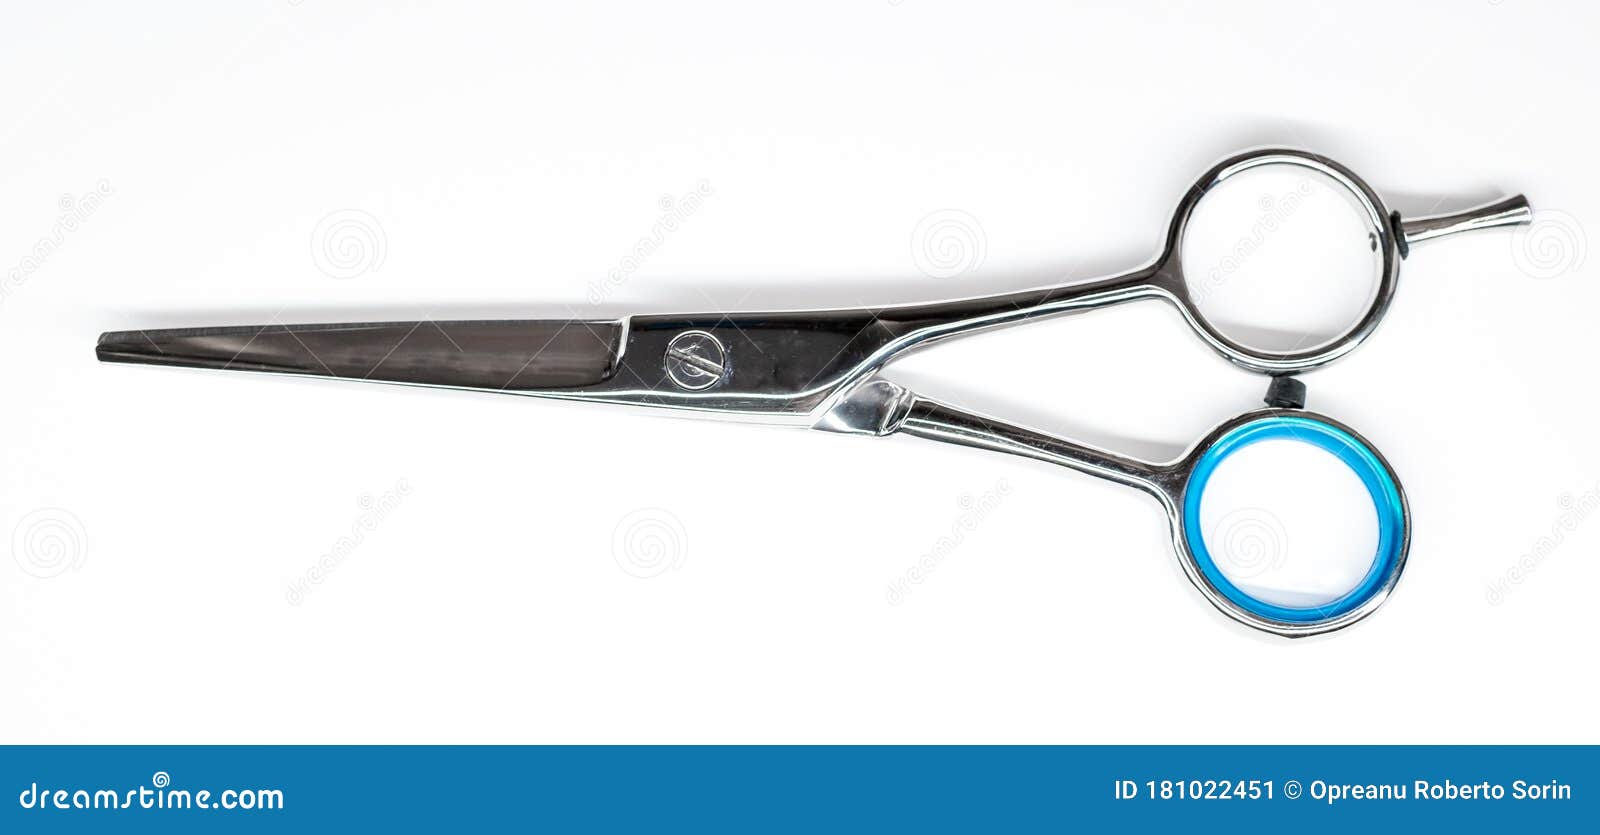 hair cutting scissors for hairdressers